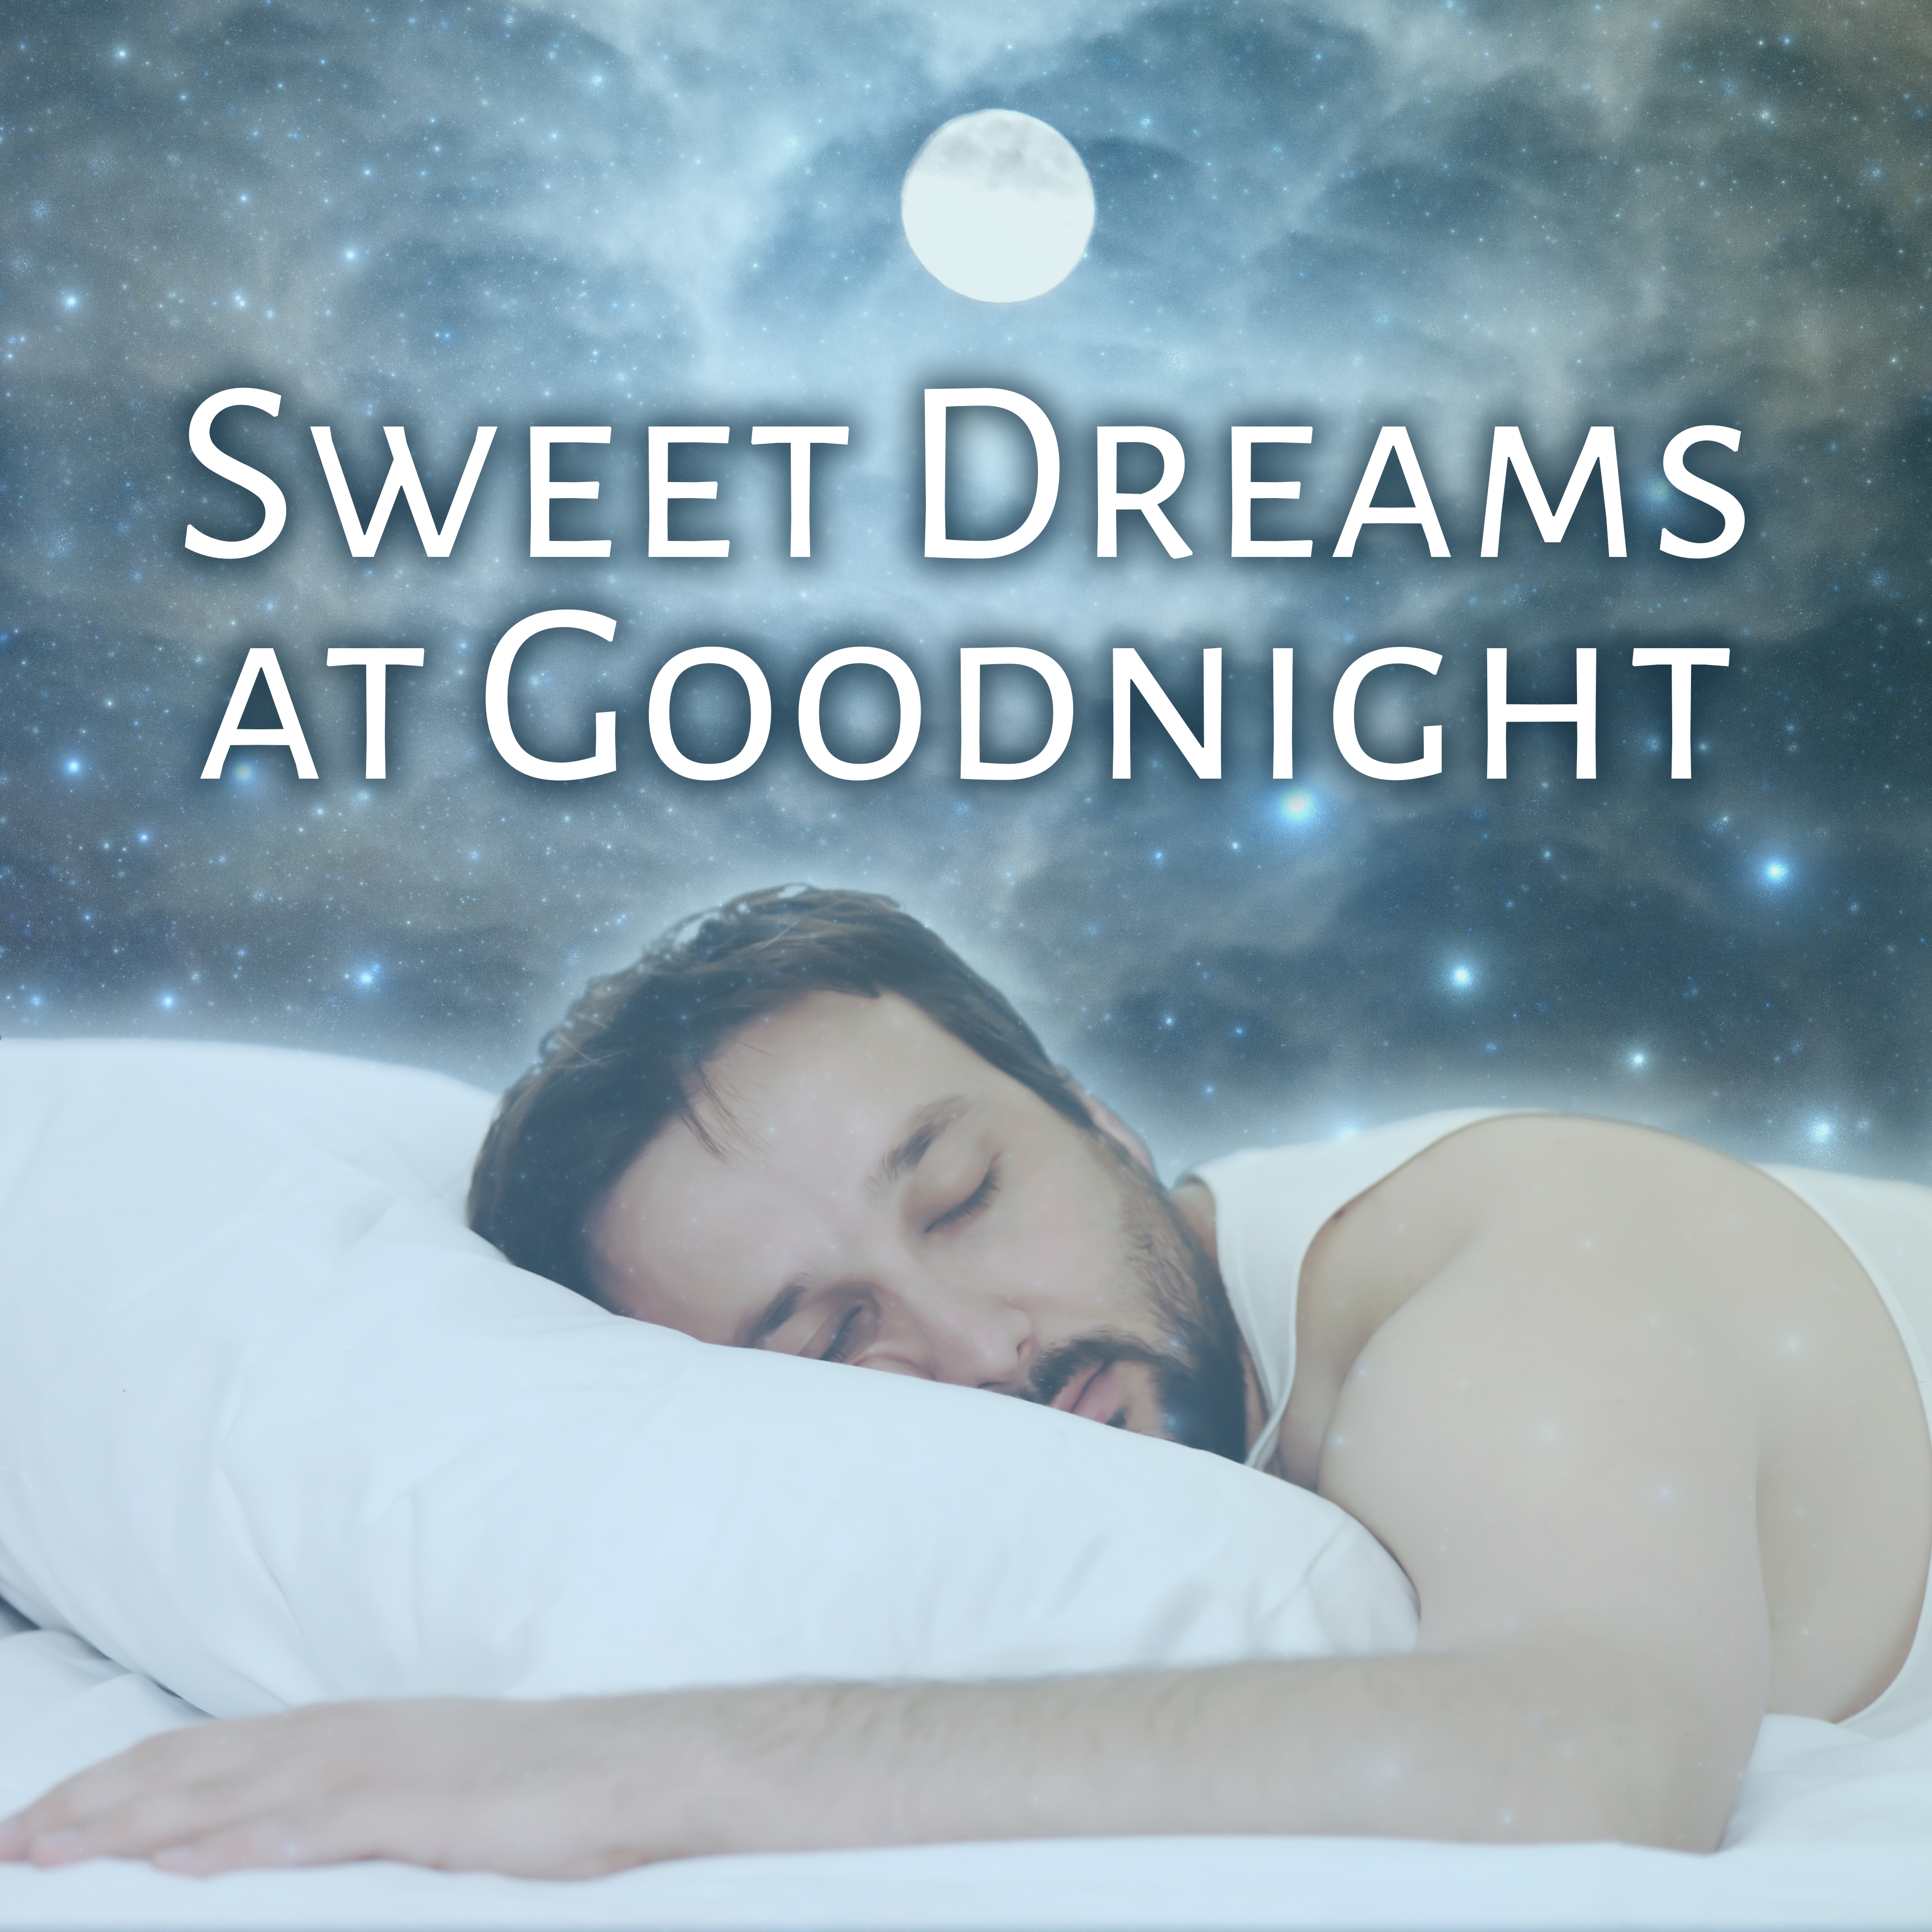 Sweet Dreams at Goodnight – Deep Sleep, Nature Sounds, Healing Lullabies to Bed, Soft Melodies, Calm Down, Pure Sleep, Relaxation